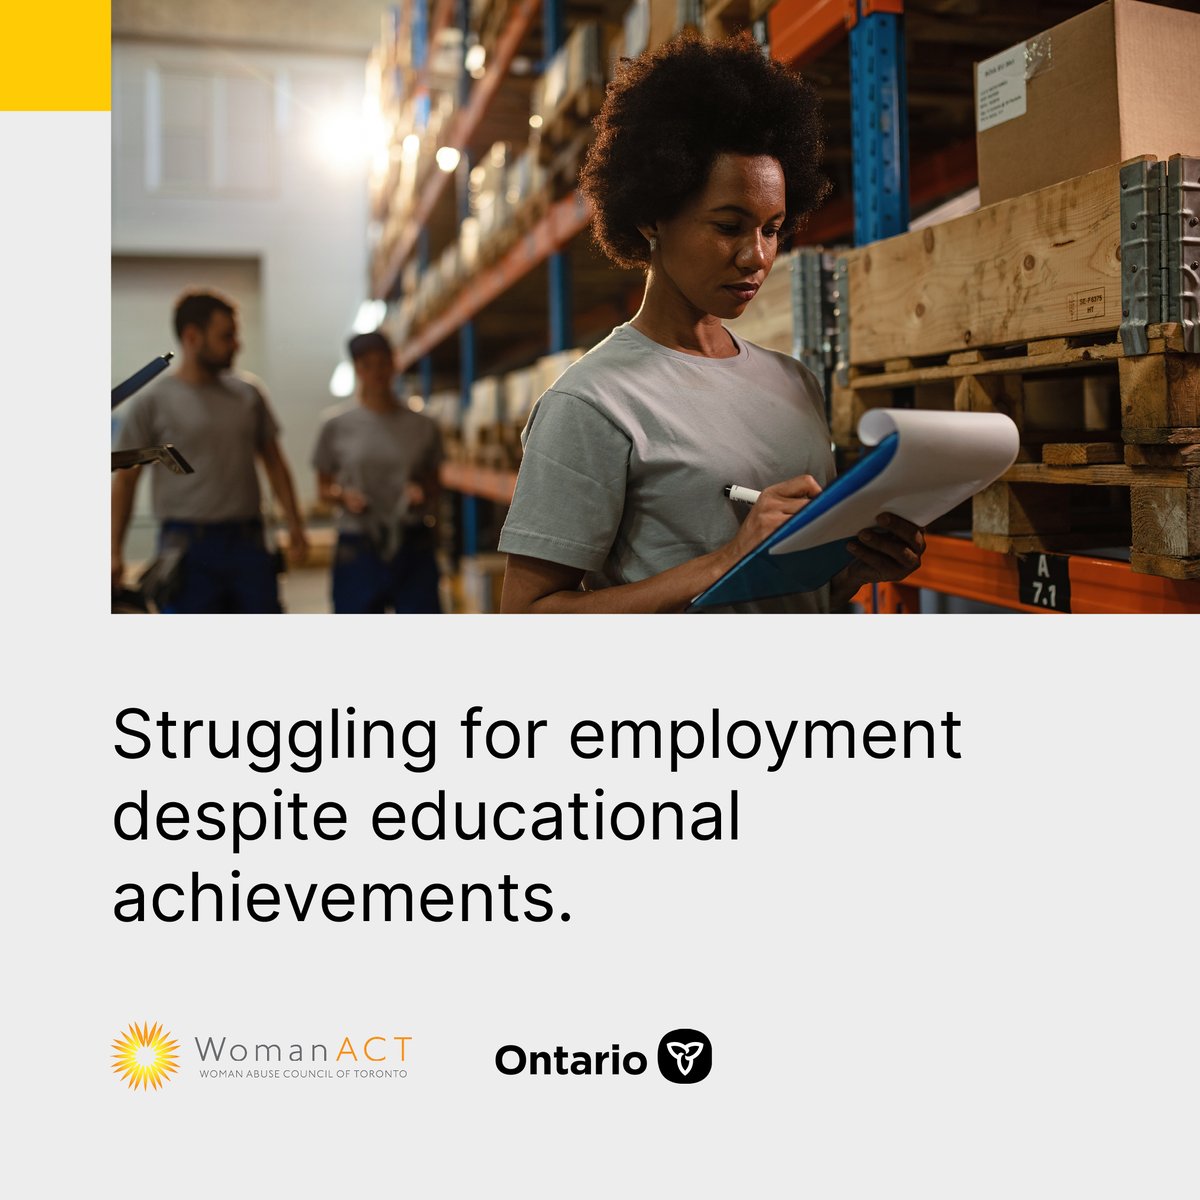 Black women in Canada, despite higher education levels, encounter challenges securing employment and advancing in their careers, often relegated to low-wage and precarious jobs due to discrimination and lack of mentorship. womanact.ca/publications/b…